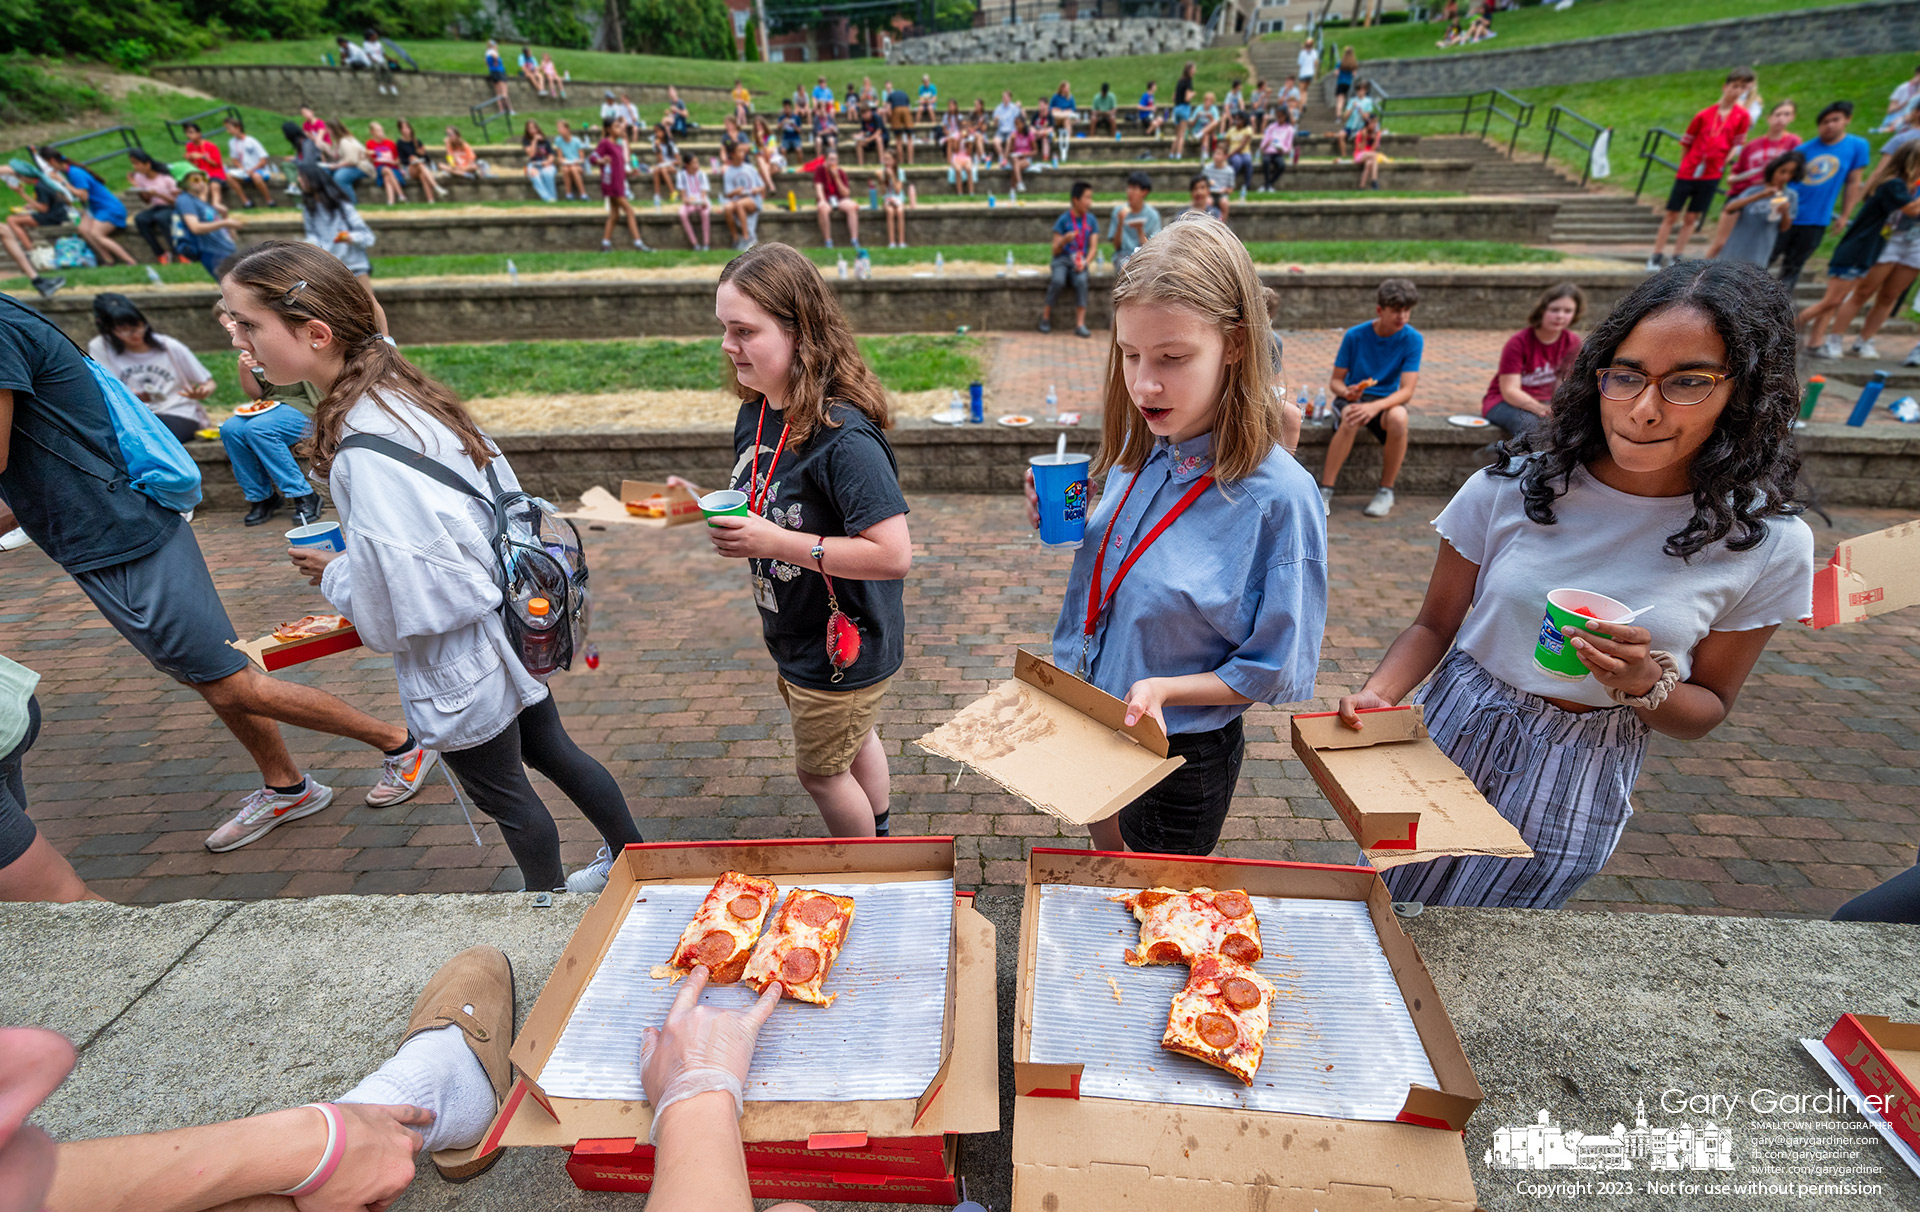 A youth group is treated to pizza for lunch in the amphitheater during an outing at Alum Creek Park North. My Final Photo for July 19, 2023.